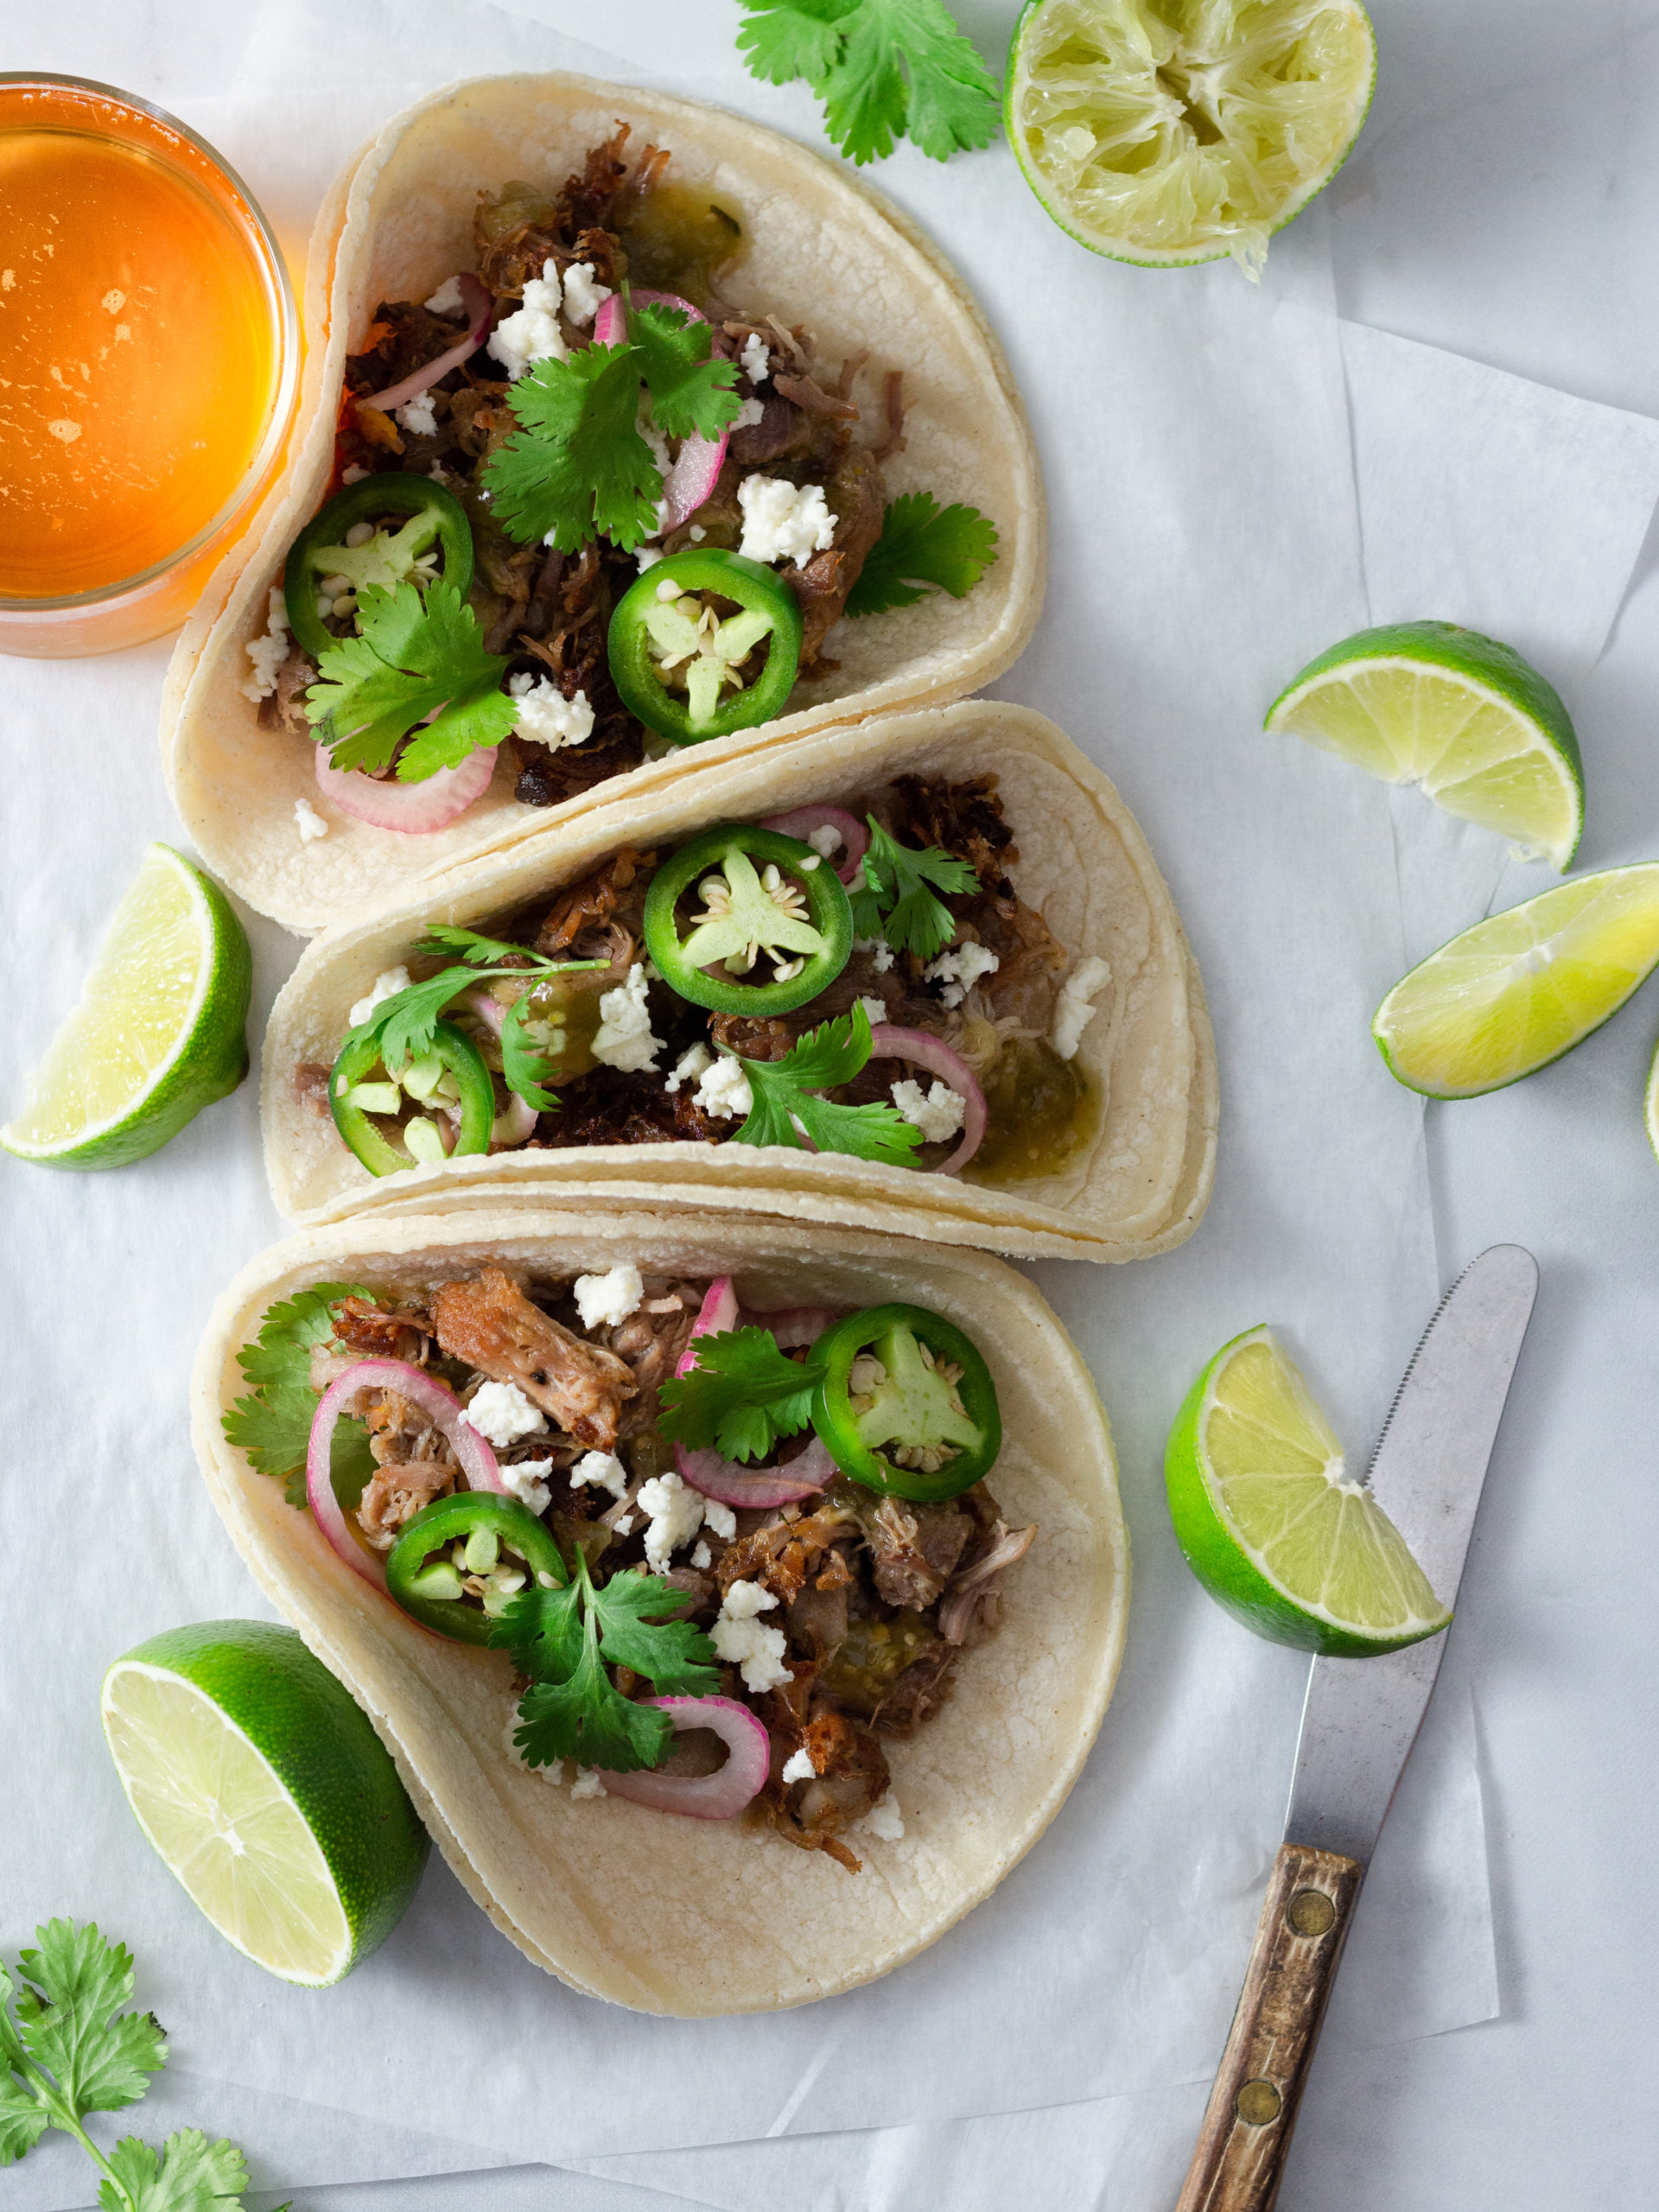 Overhead view of three carnitas tacos topped with red onions, jalapeños and cilantro, surrounded by limes and a beer.